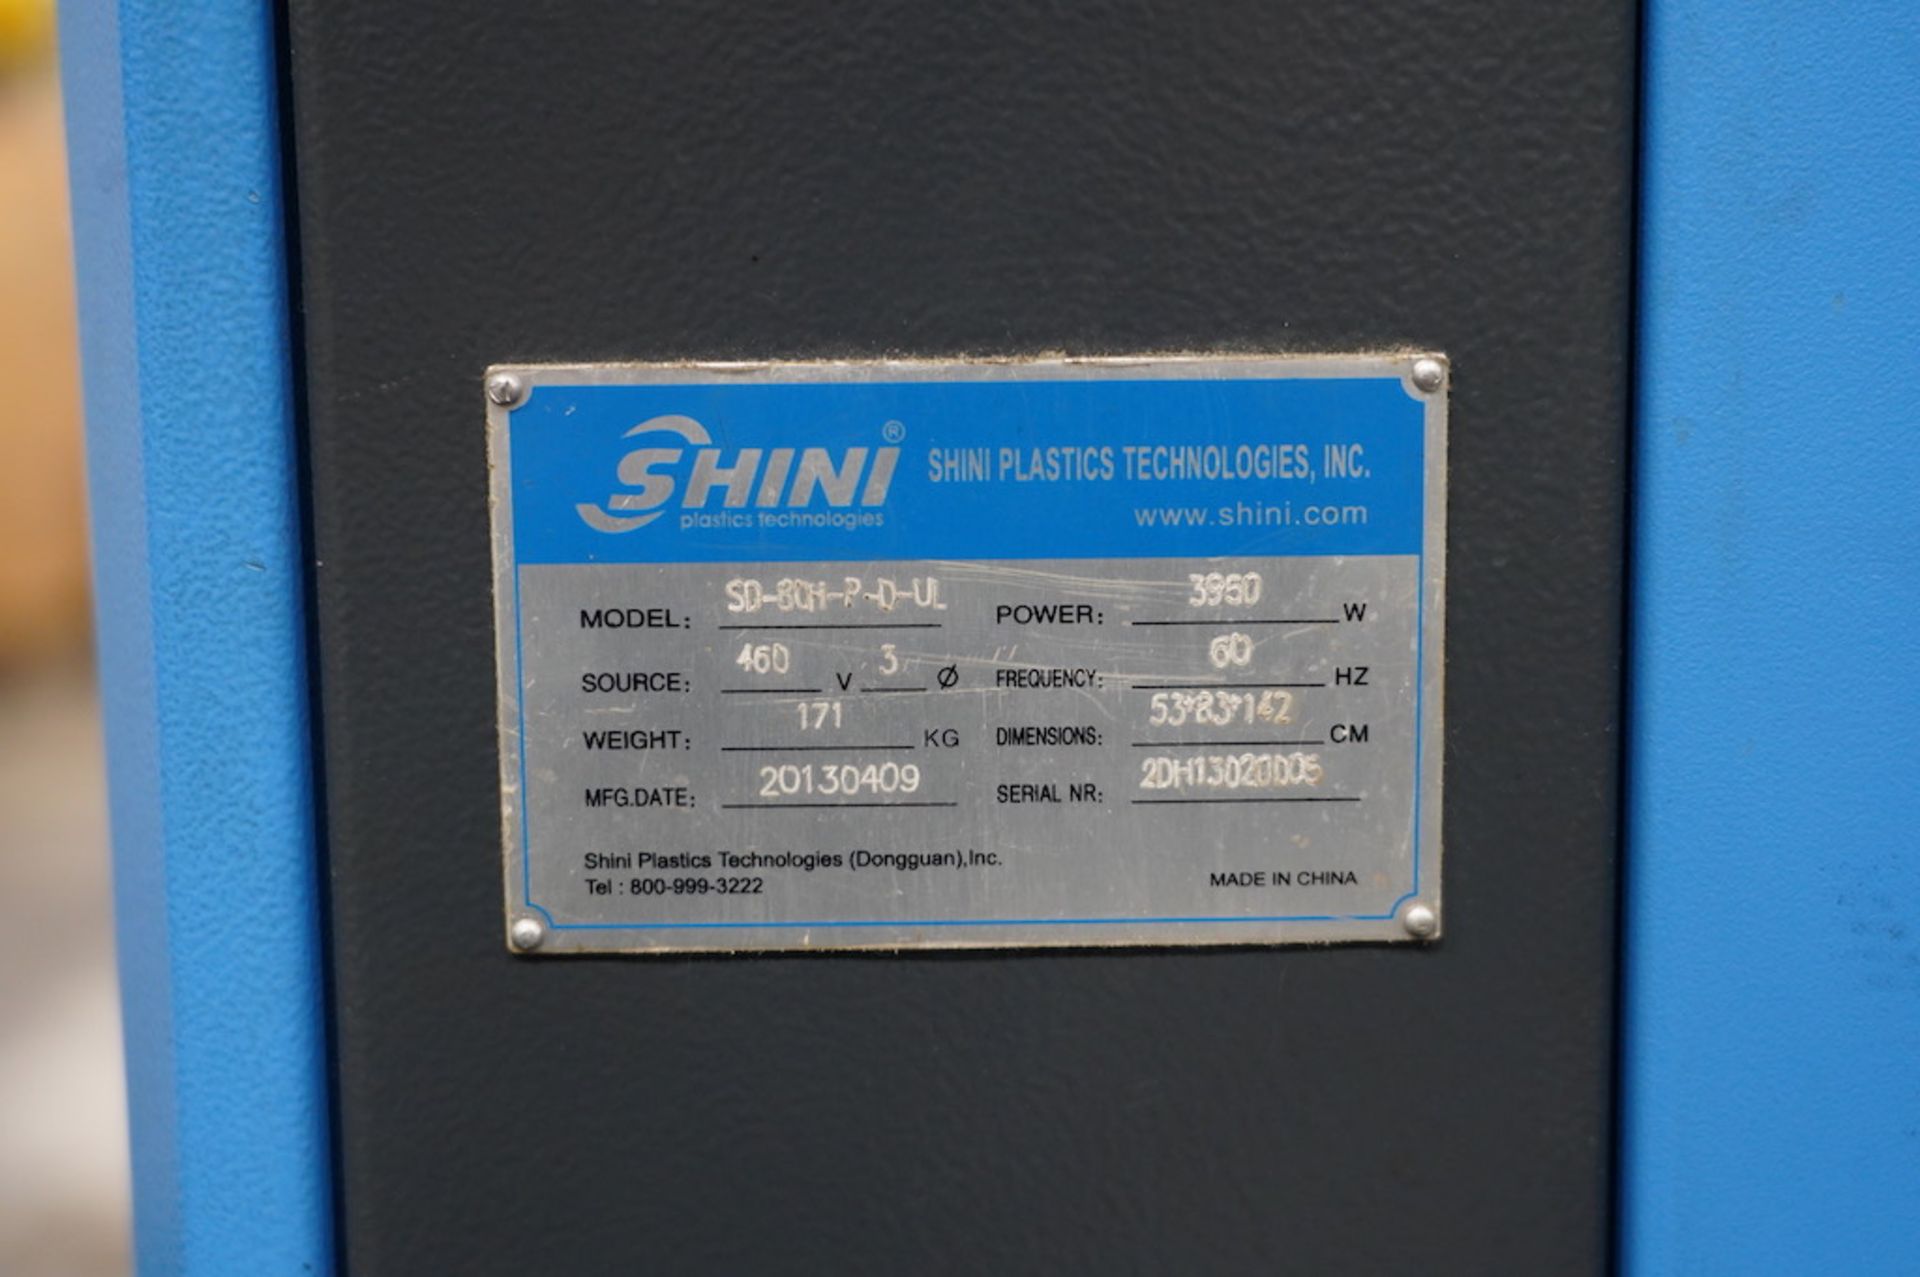 Shini SD-80H-P-D-UL Material Dryer, New in 2013 - Image 6 of 6